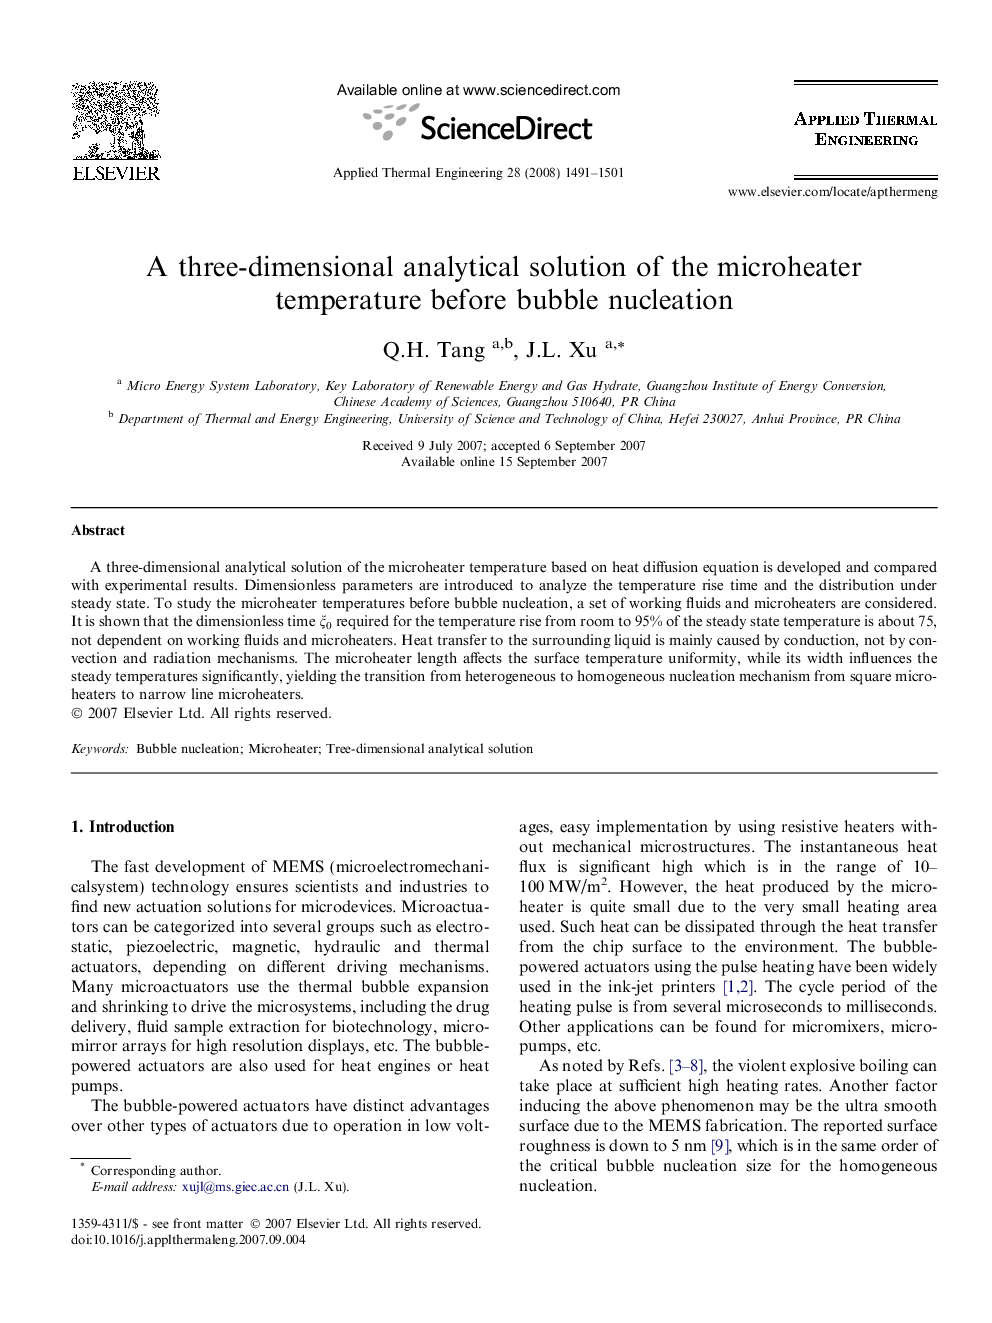 A three-dimensional analytical solution of the microheater temperature before bubble nucleation